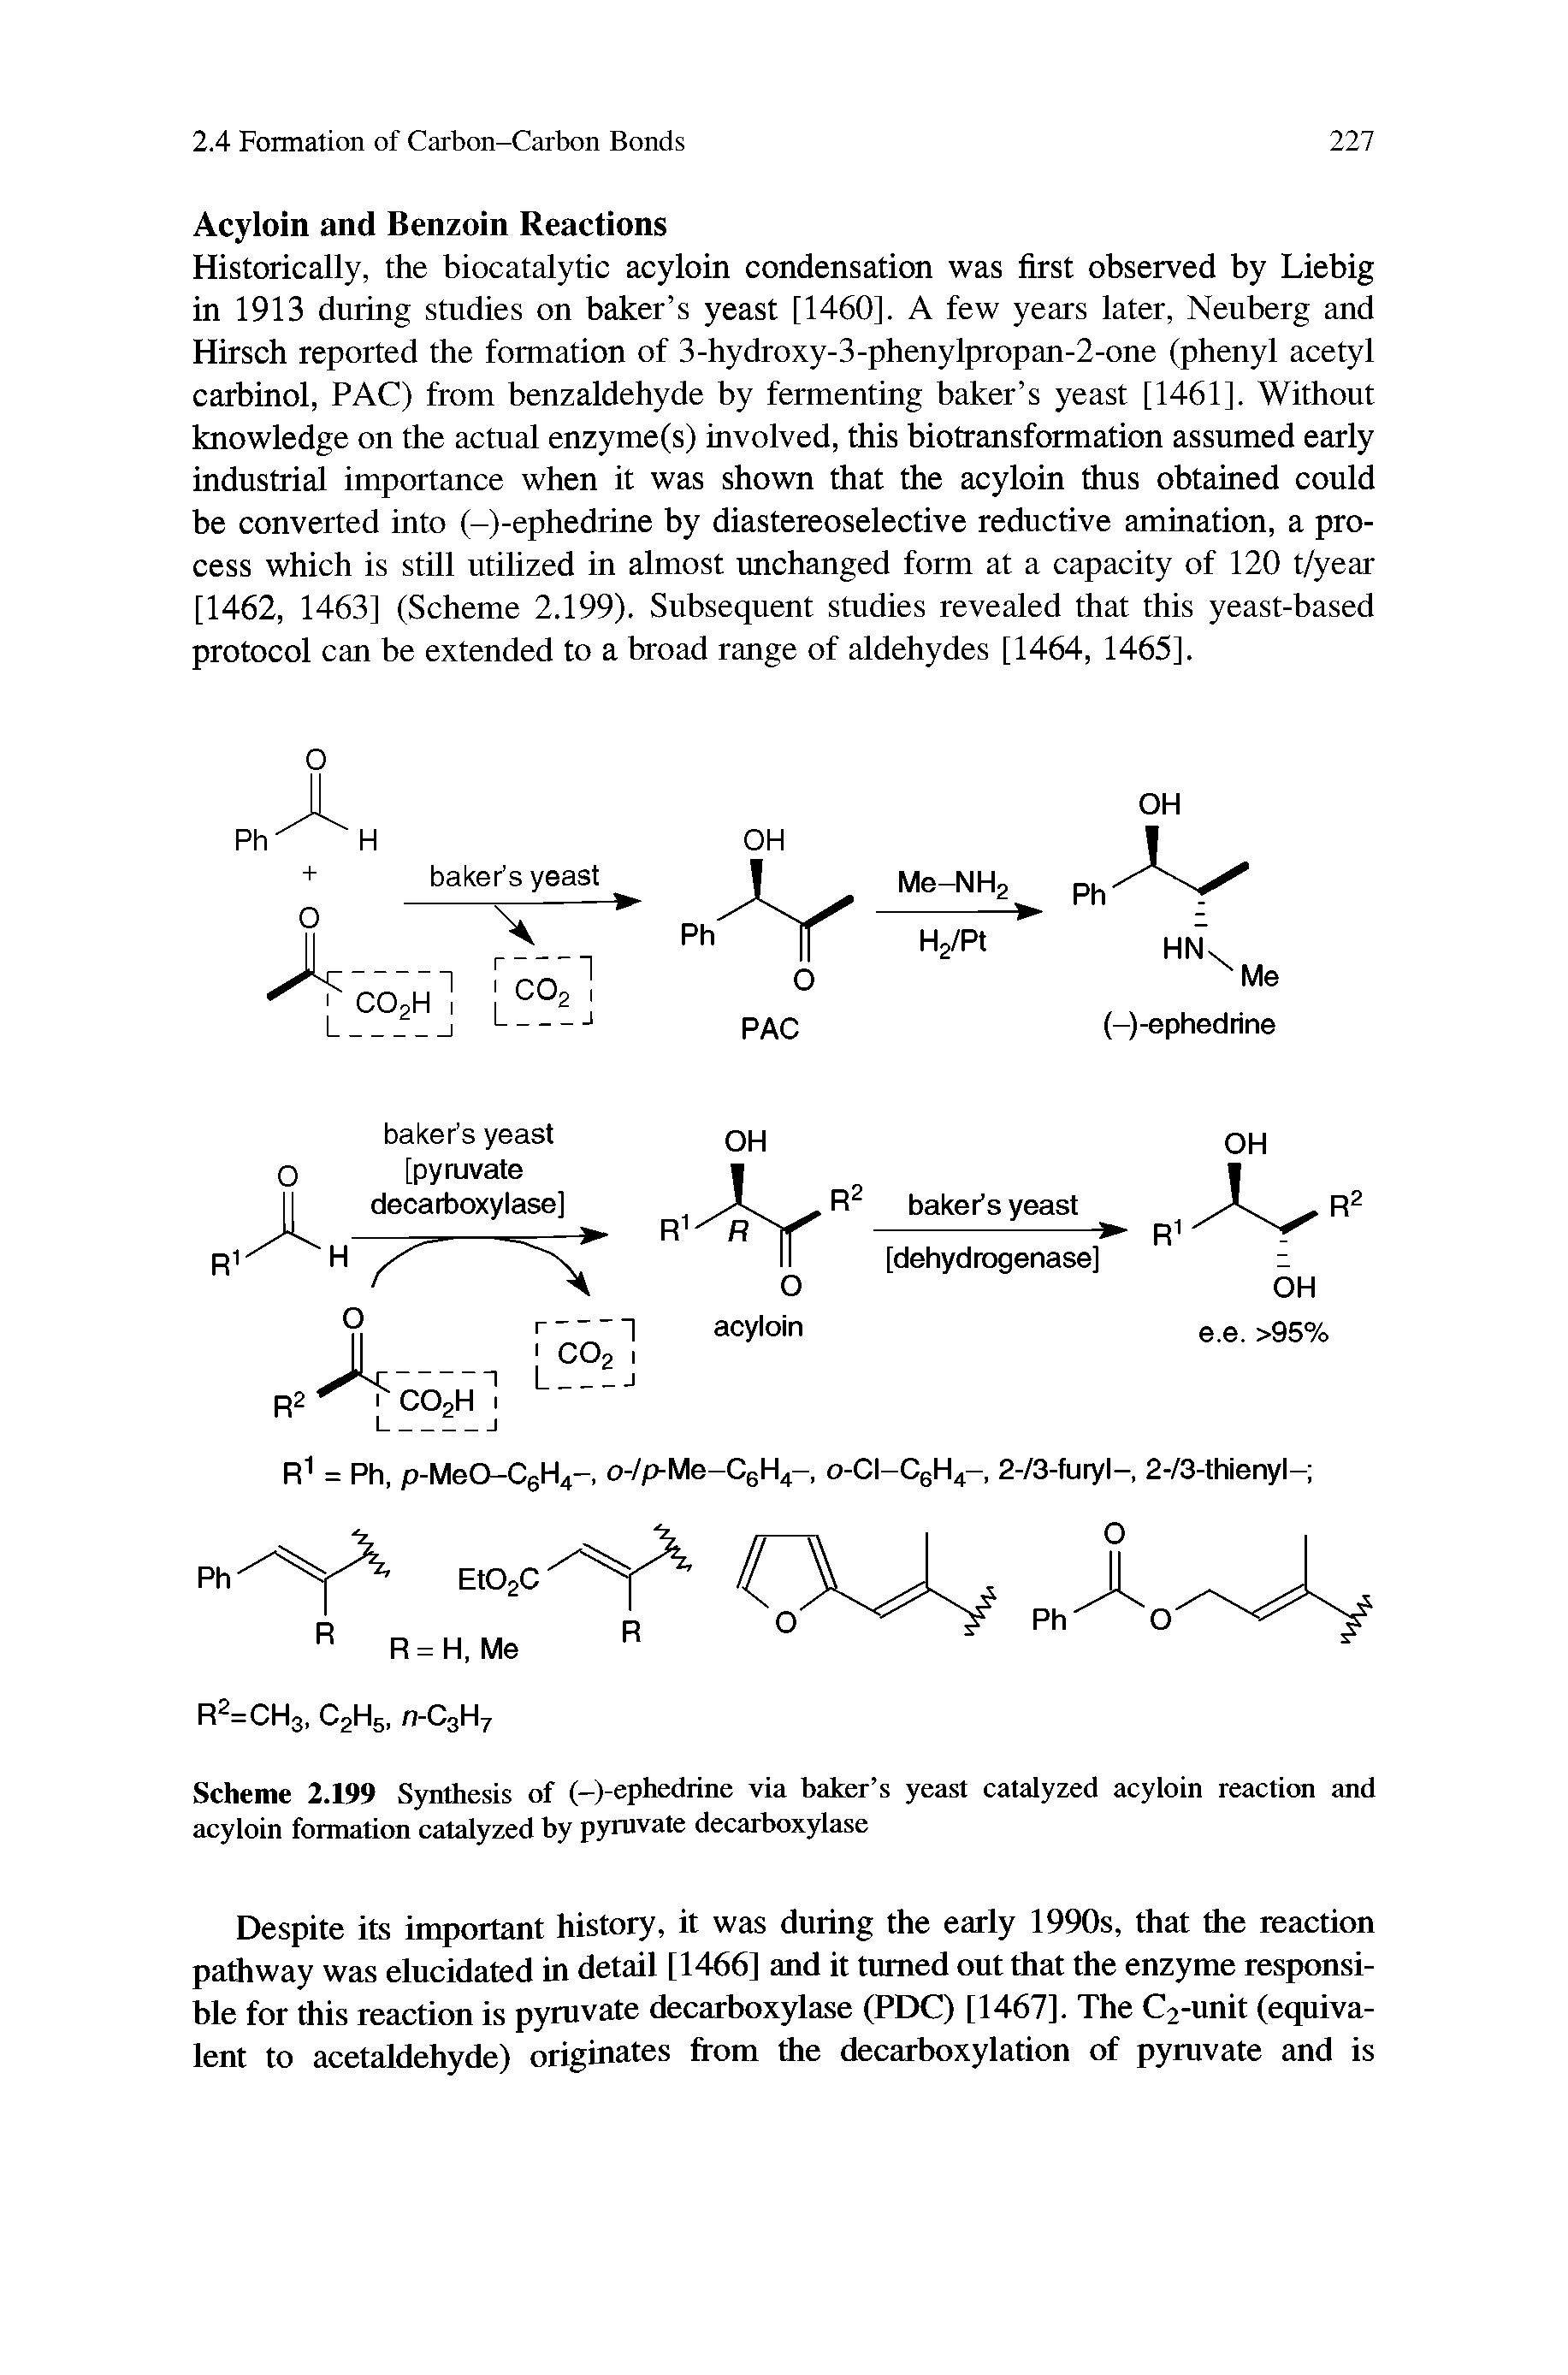 Scheme 2.199 Synthesis of (-)-ephedrine via baker s yeast catalyzed acyloin reaction and acyloin formation catalyzed by pyruvate decarboxylase...